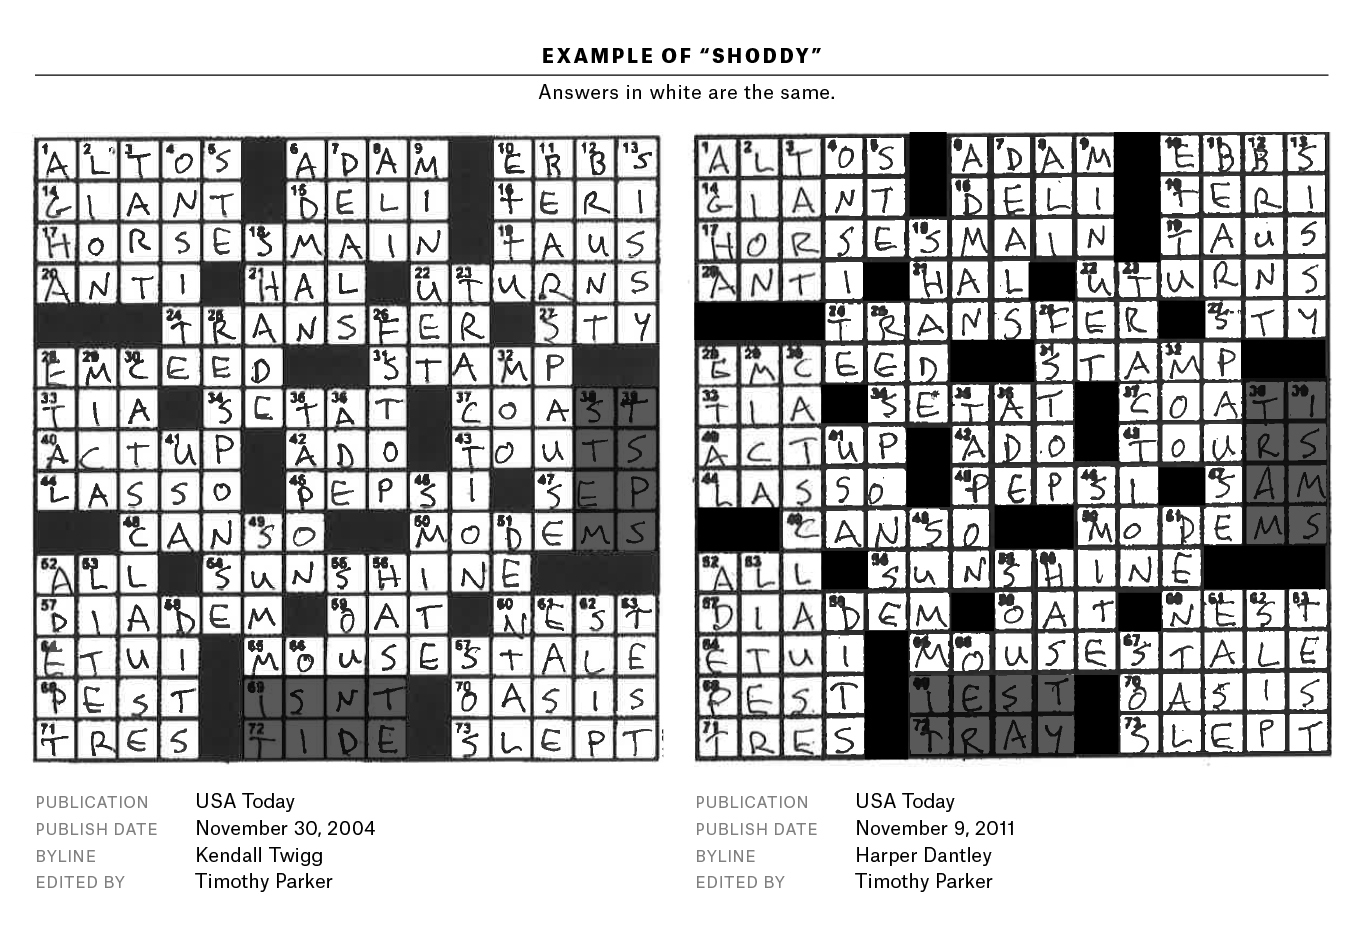 A Plagiarism Scandal Is Unfolding In The Crossword World - Printable Crossword Toronto Star